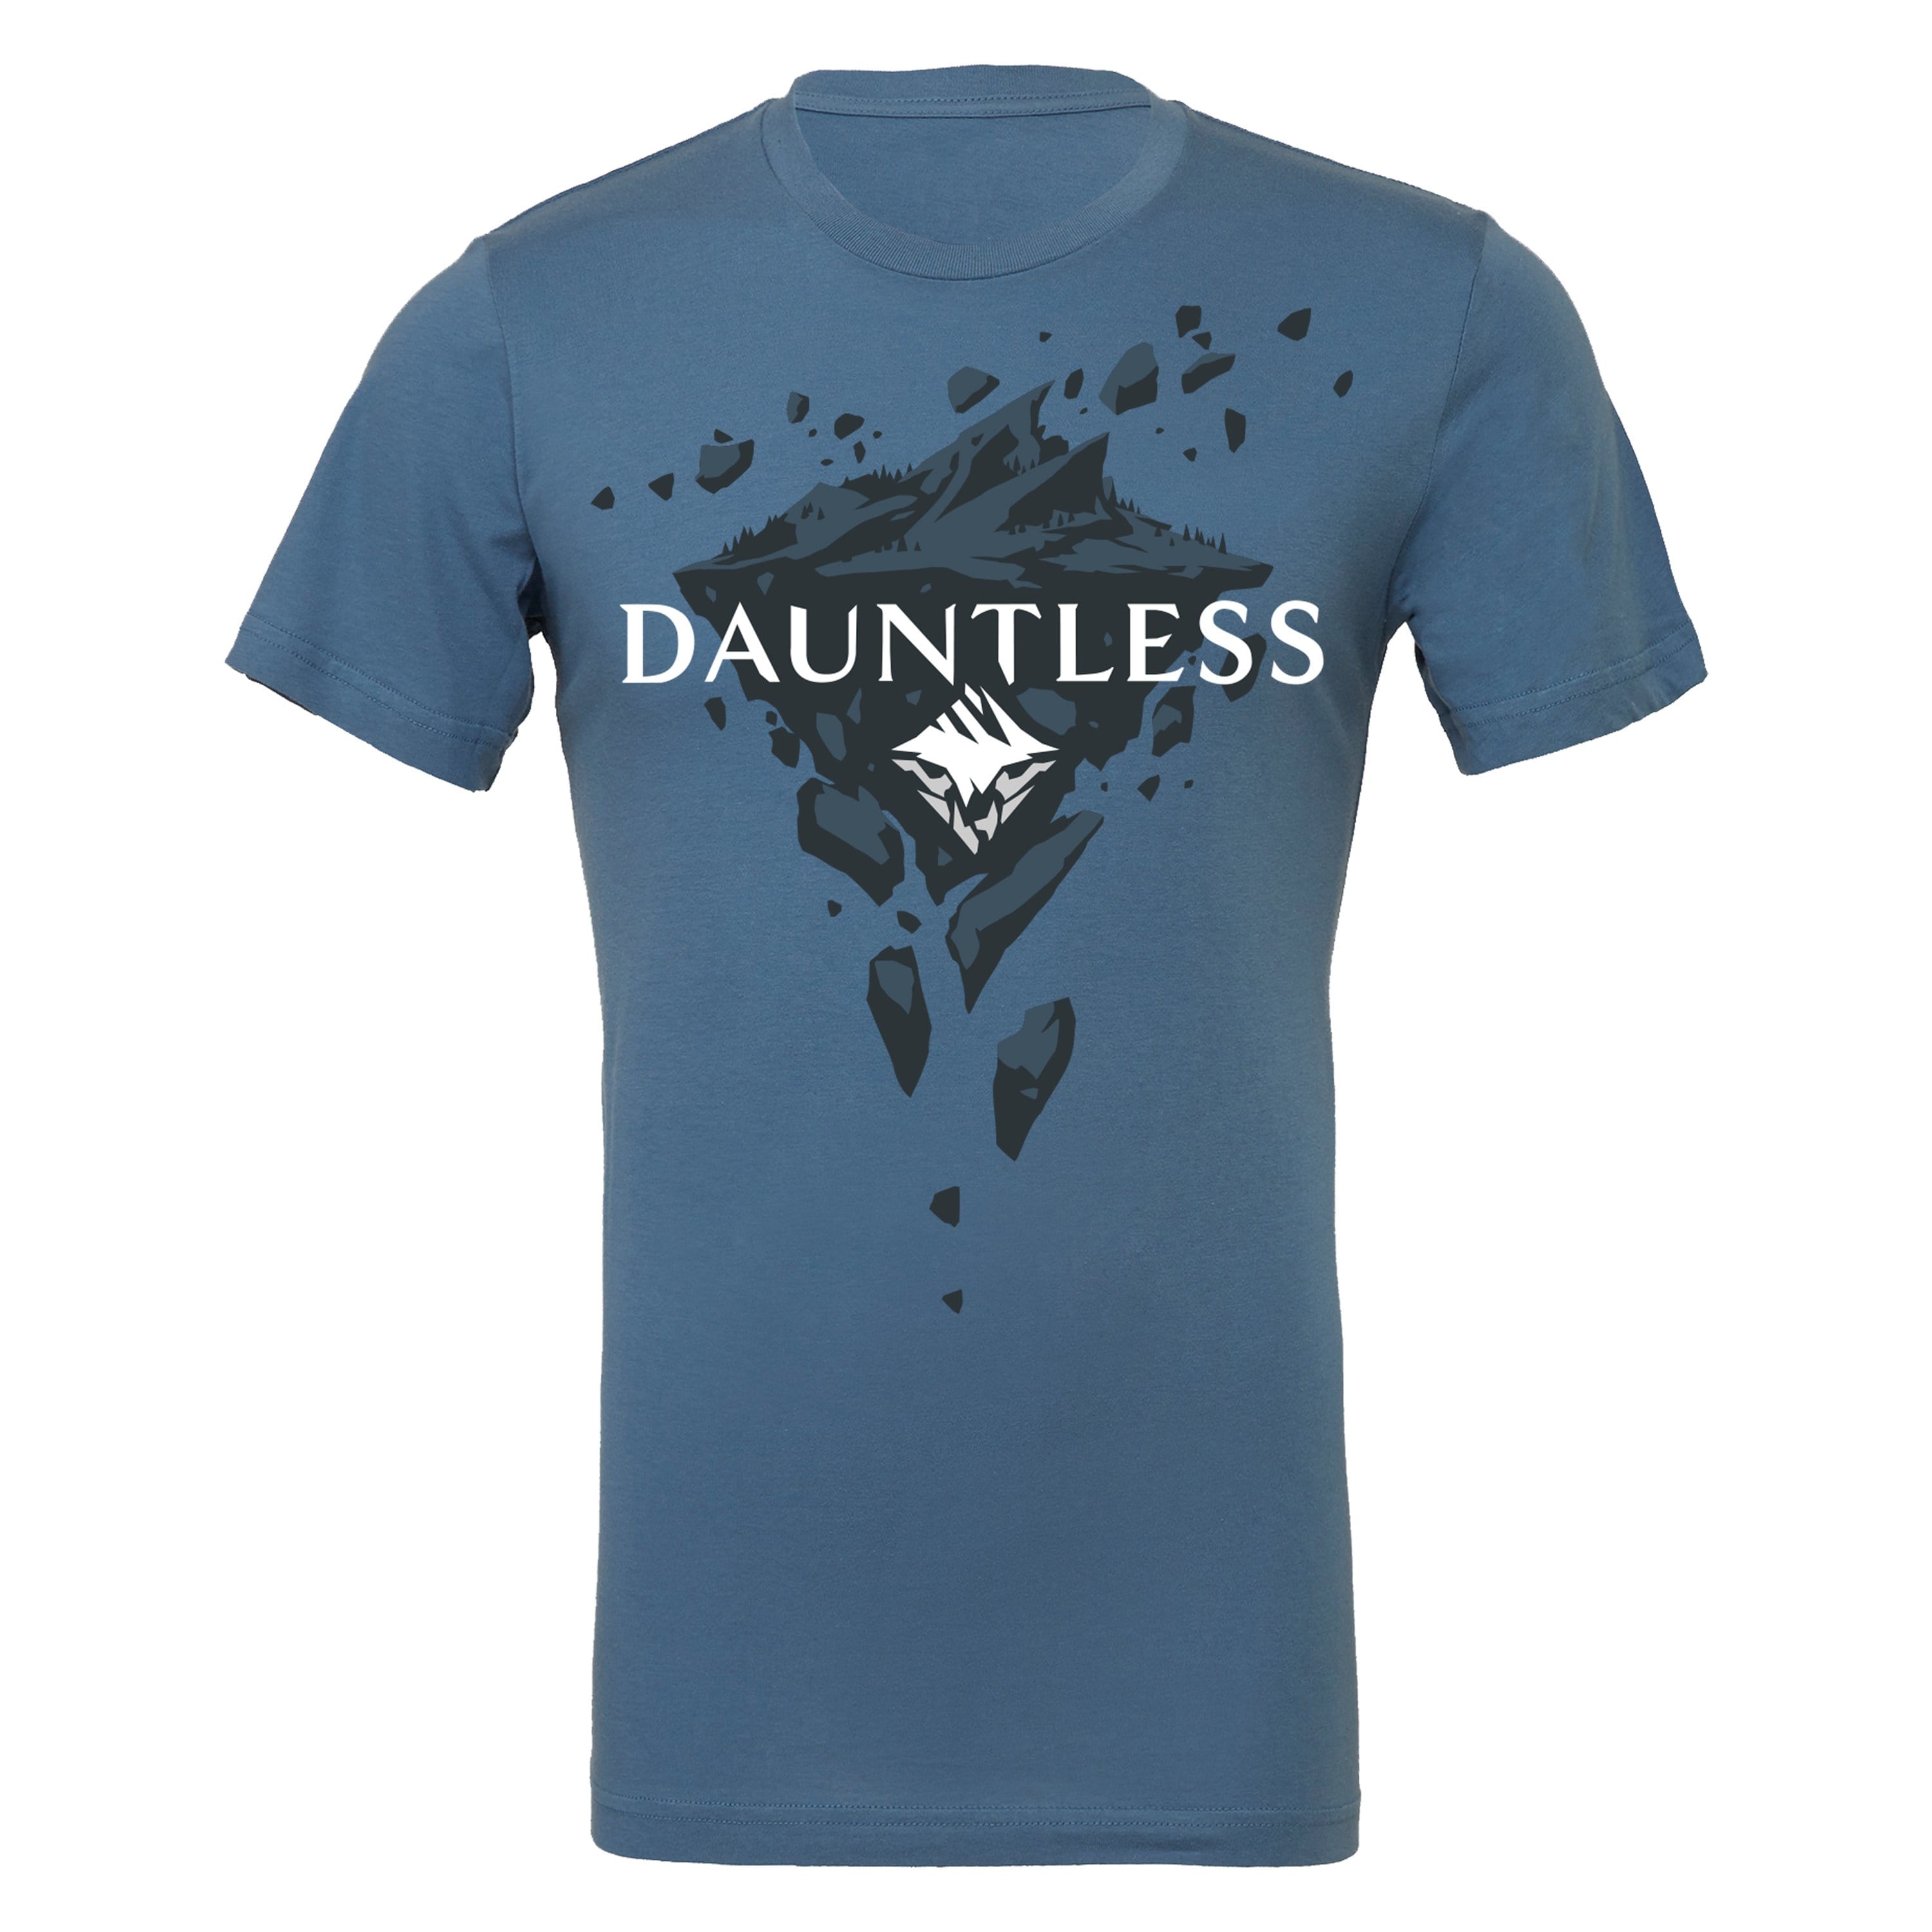 Dauntless - Shattered Isles Poly Blend T-shirt